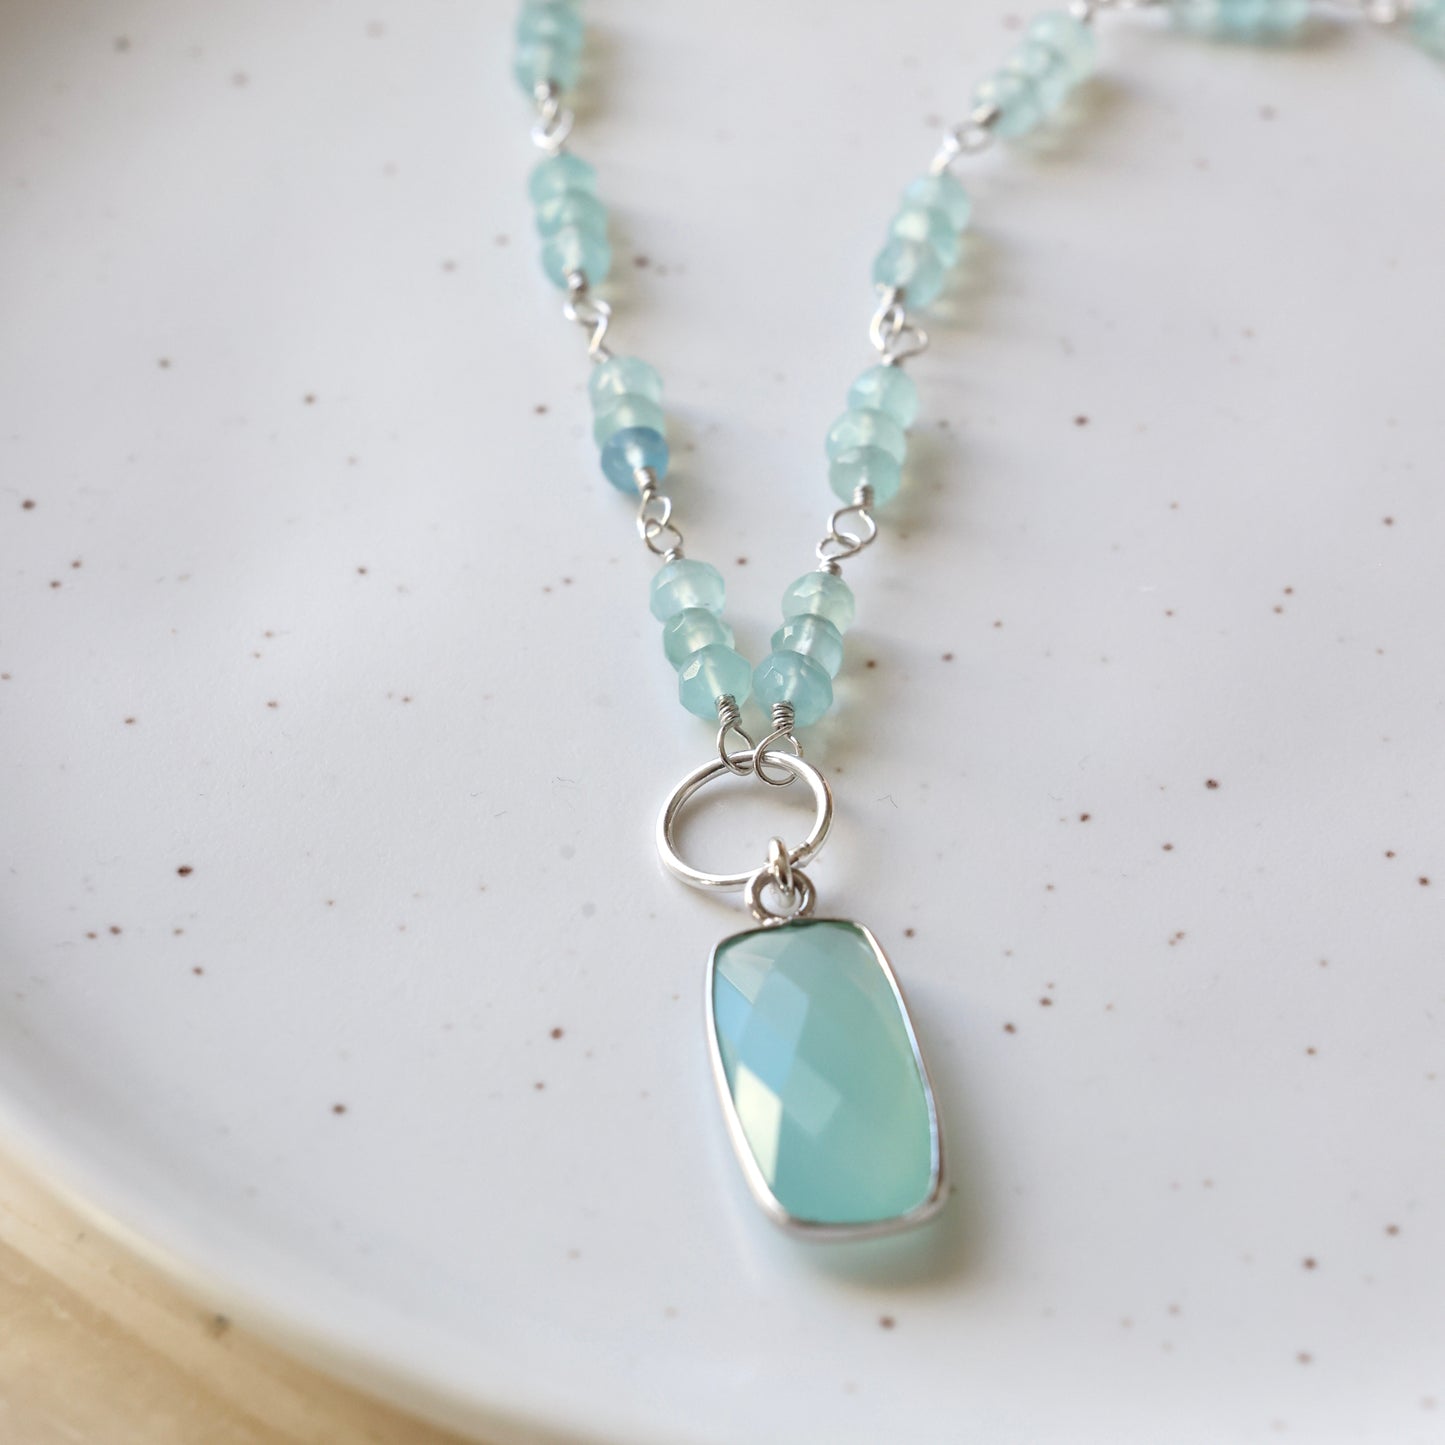 Blue and Aqua Chalcedony Silver Necklace